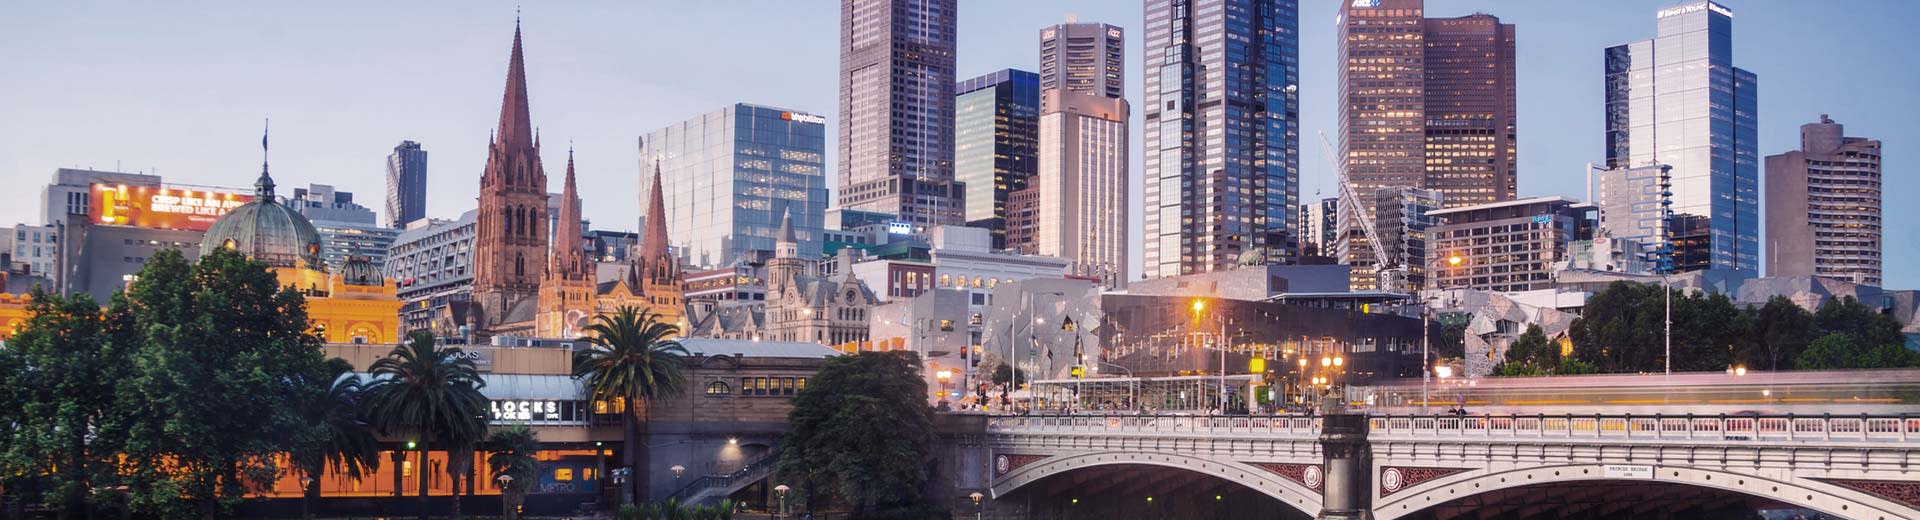 Skyscrapers and bridges of Melbourne in the half-light of dusk.